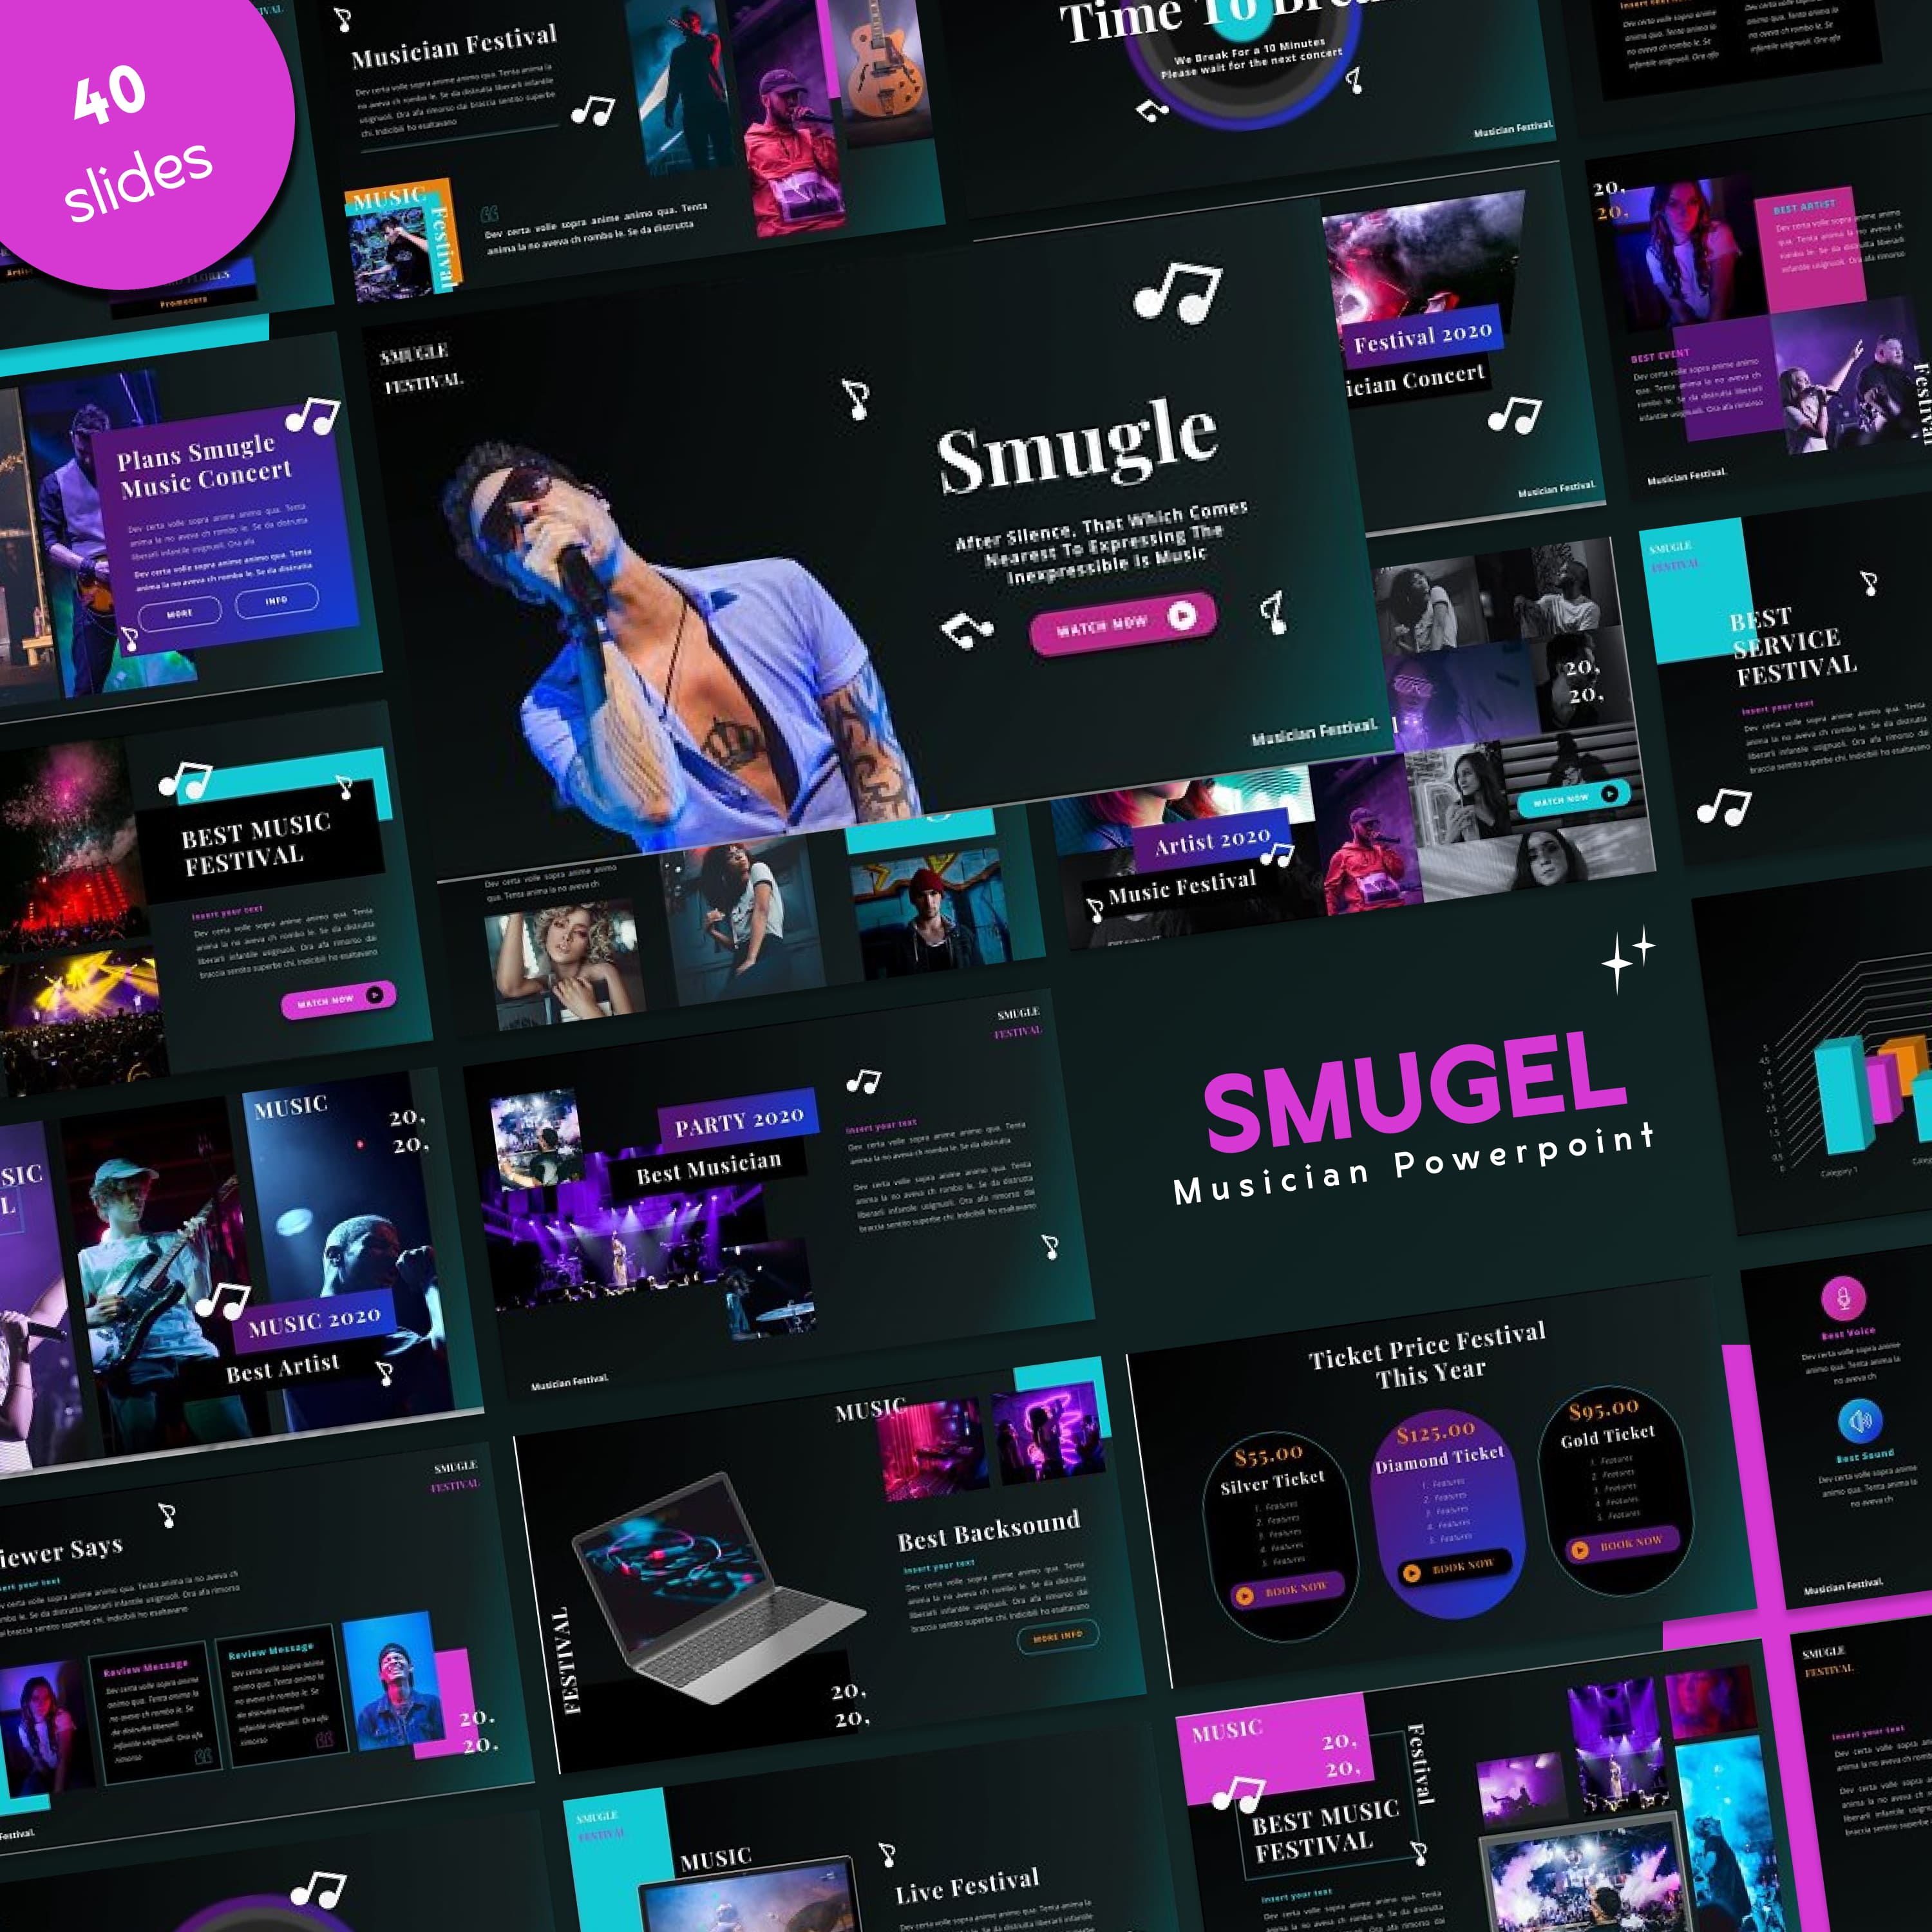 Smugle - Musician Powerpoint cover.